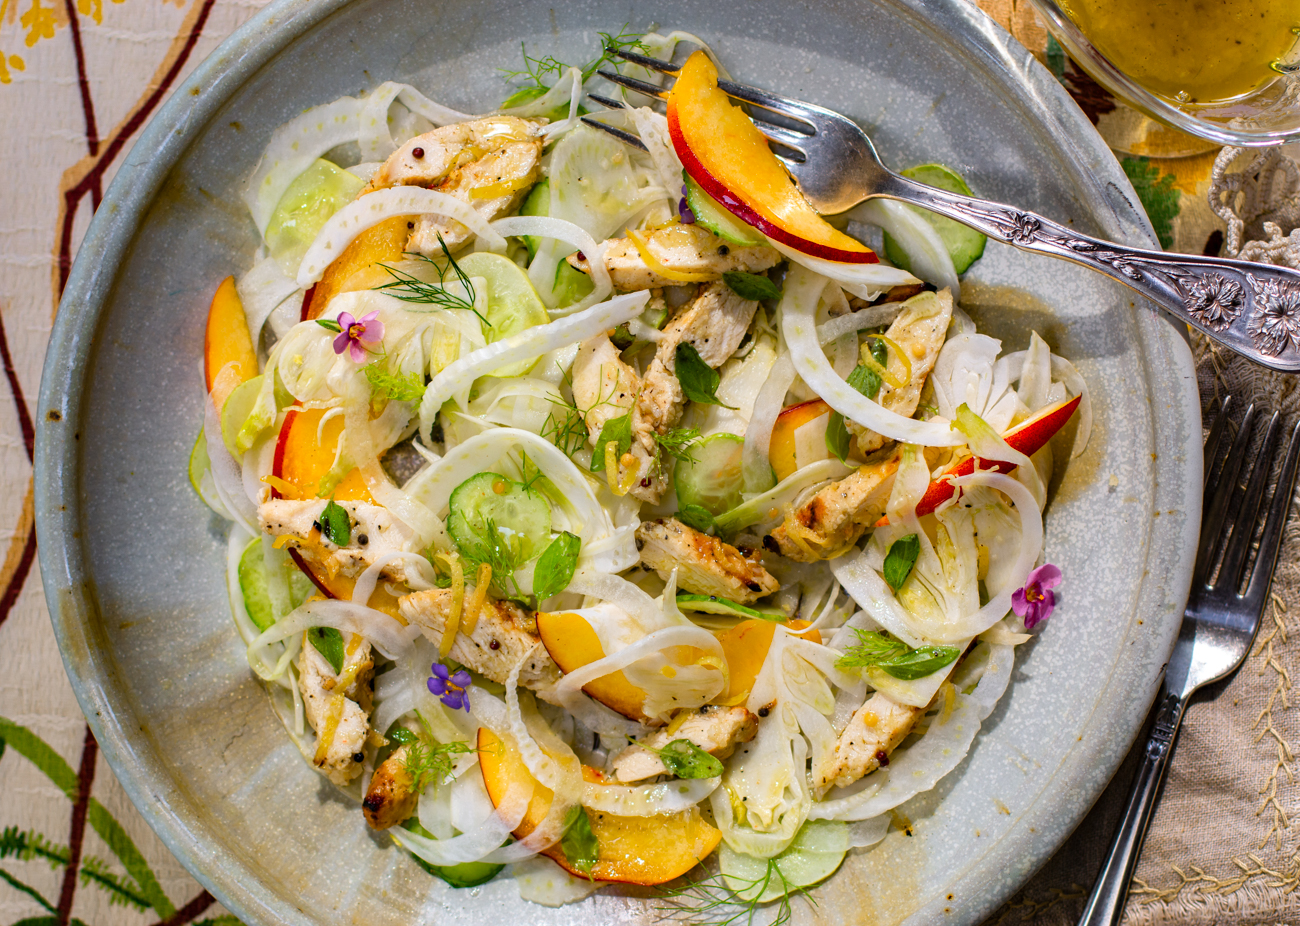 Fennel Salad and Perfect Grilled Chicken with Karen's Lemon-Oregano Marinade